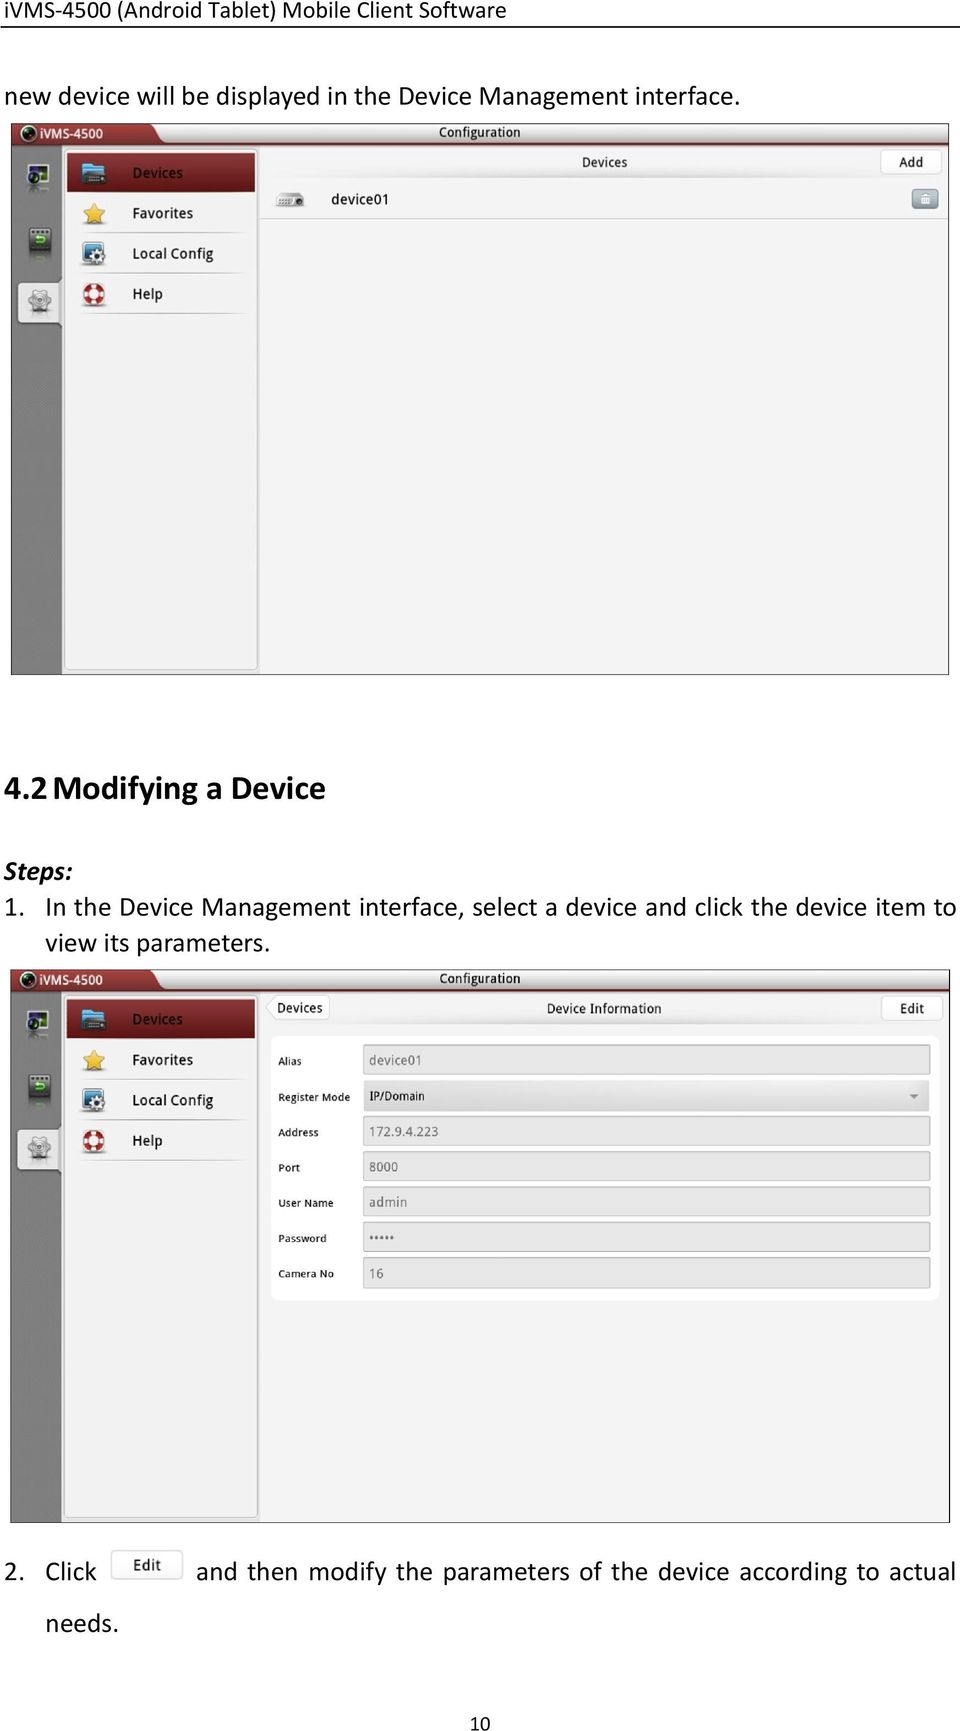 In the Device Management interface, select a device and click the